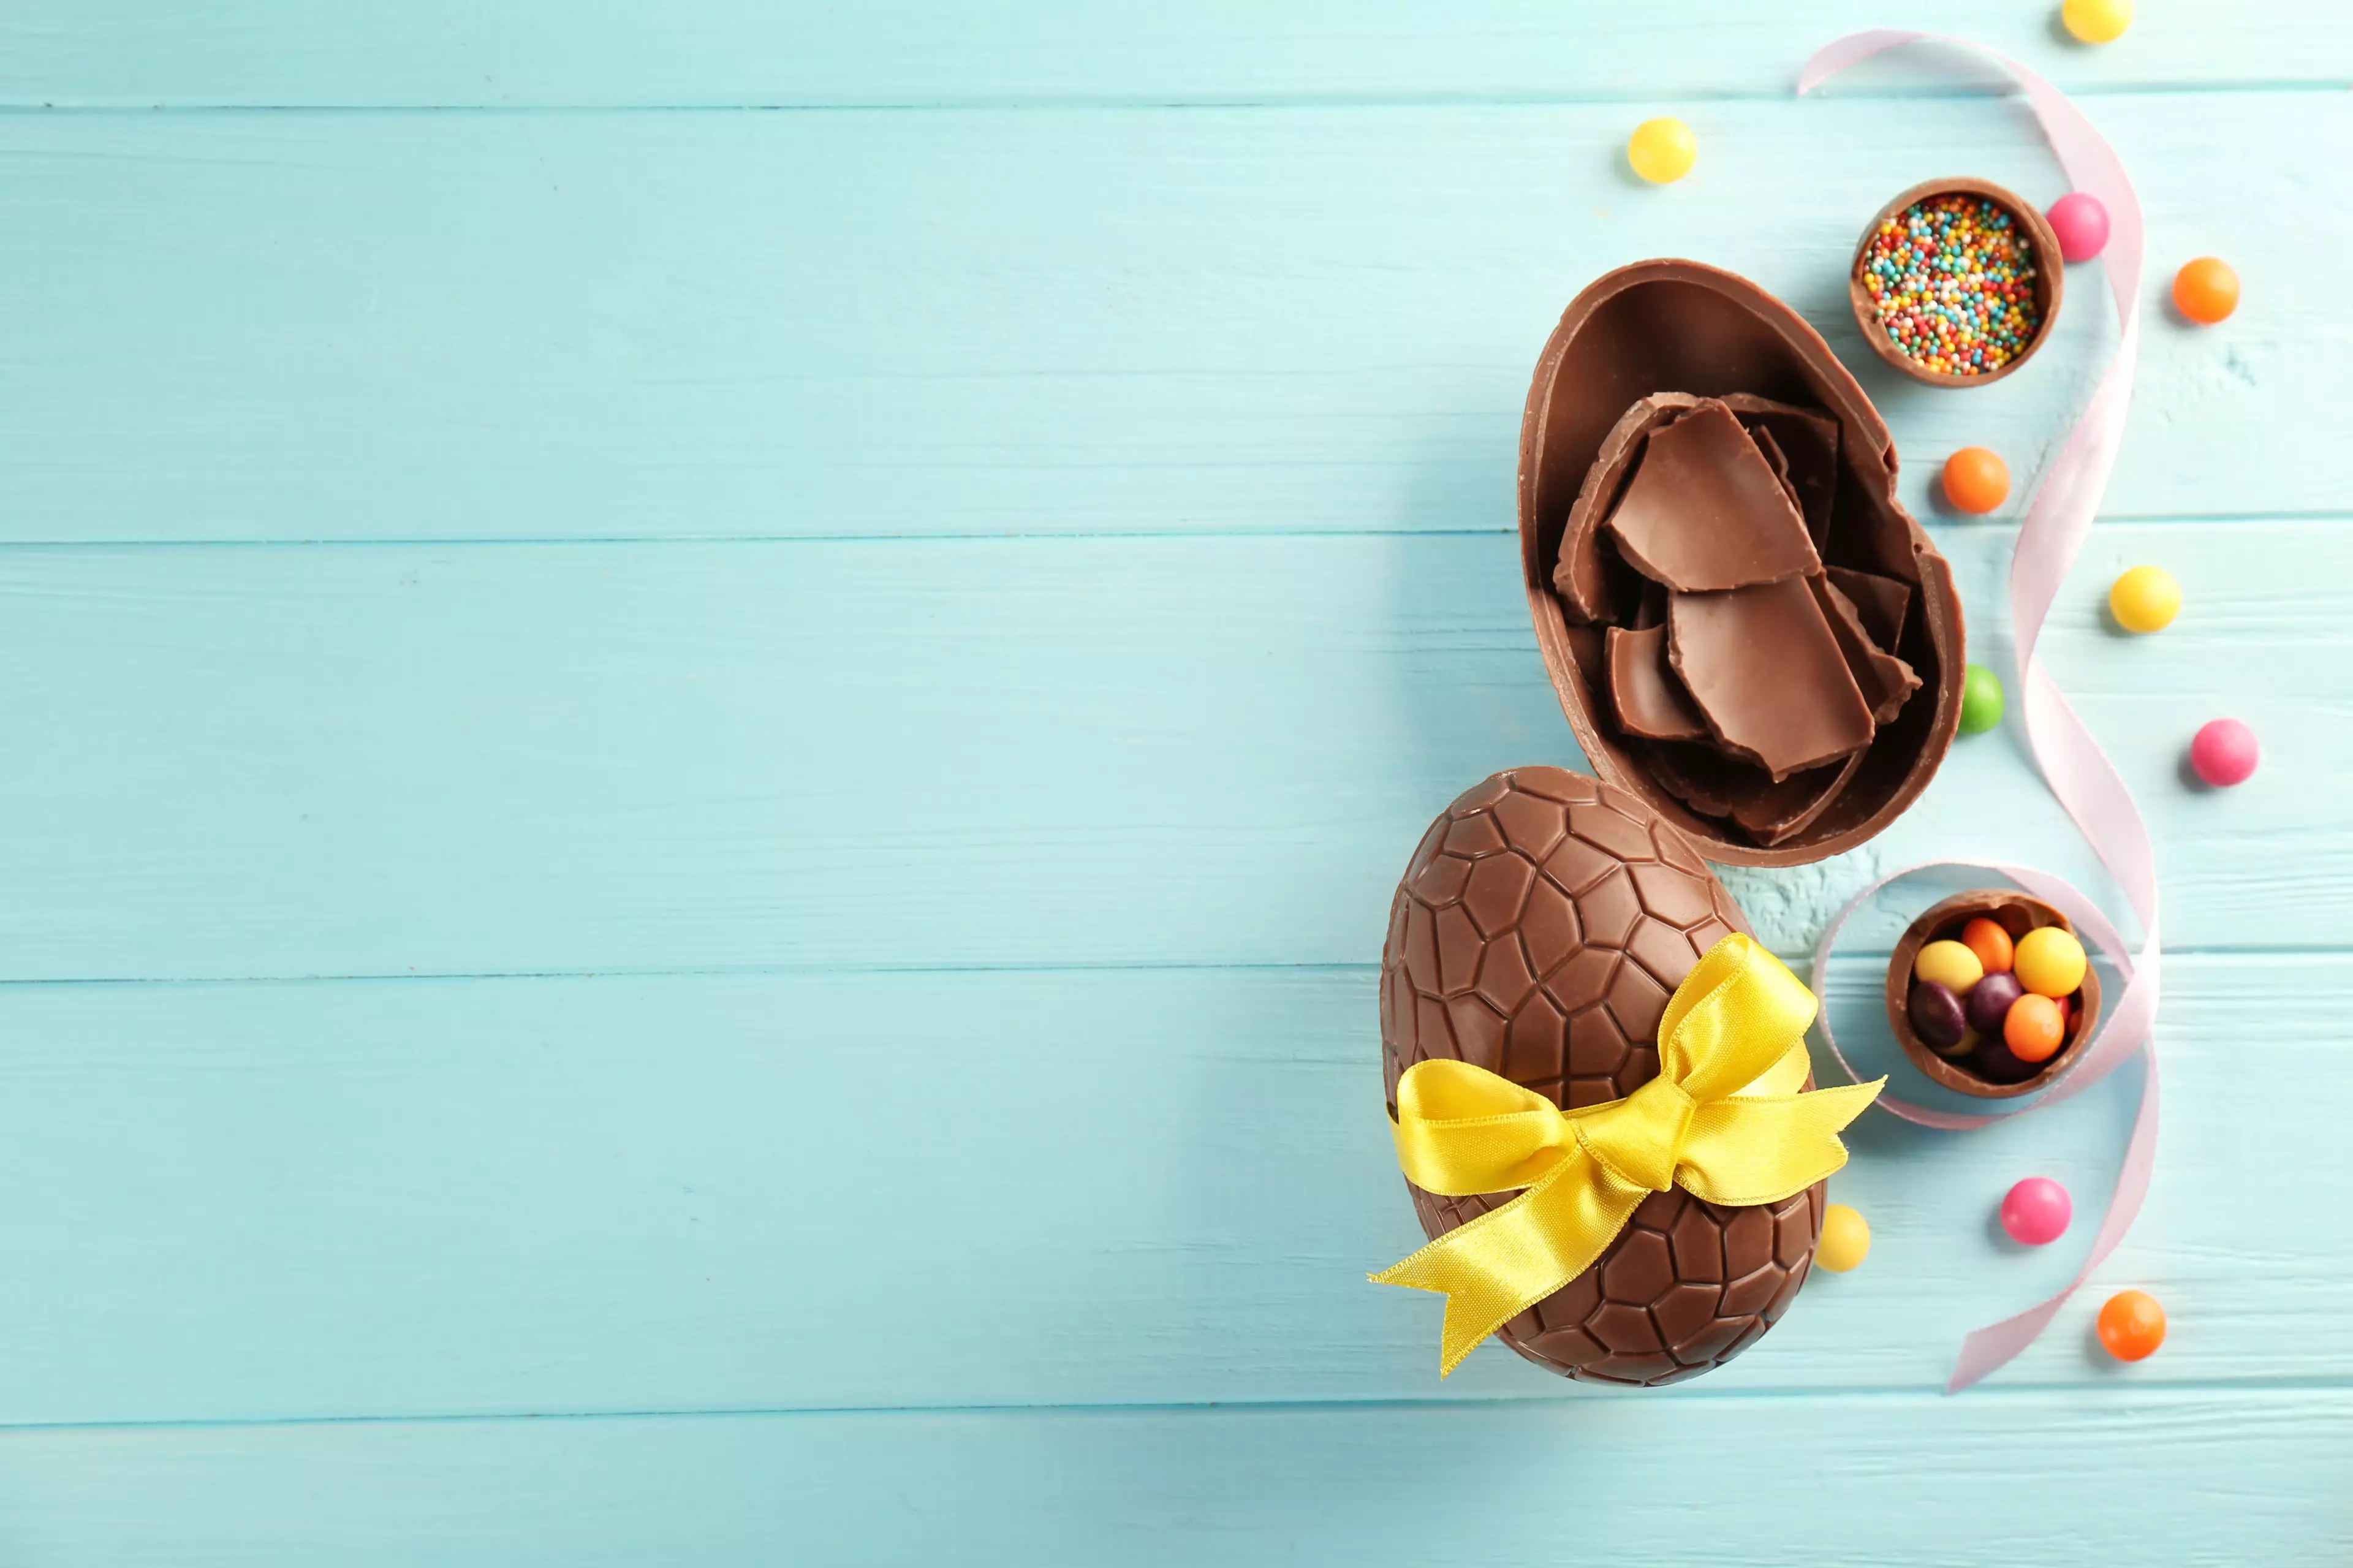 Each tasting officer will receive a selection 10 Easter eggs (